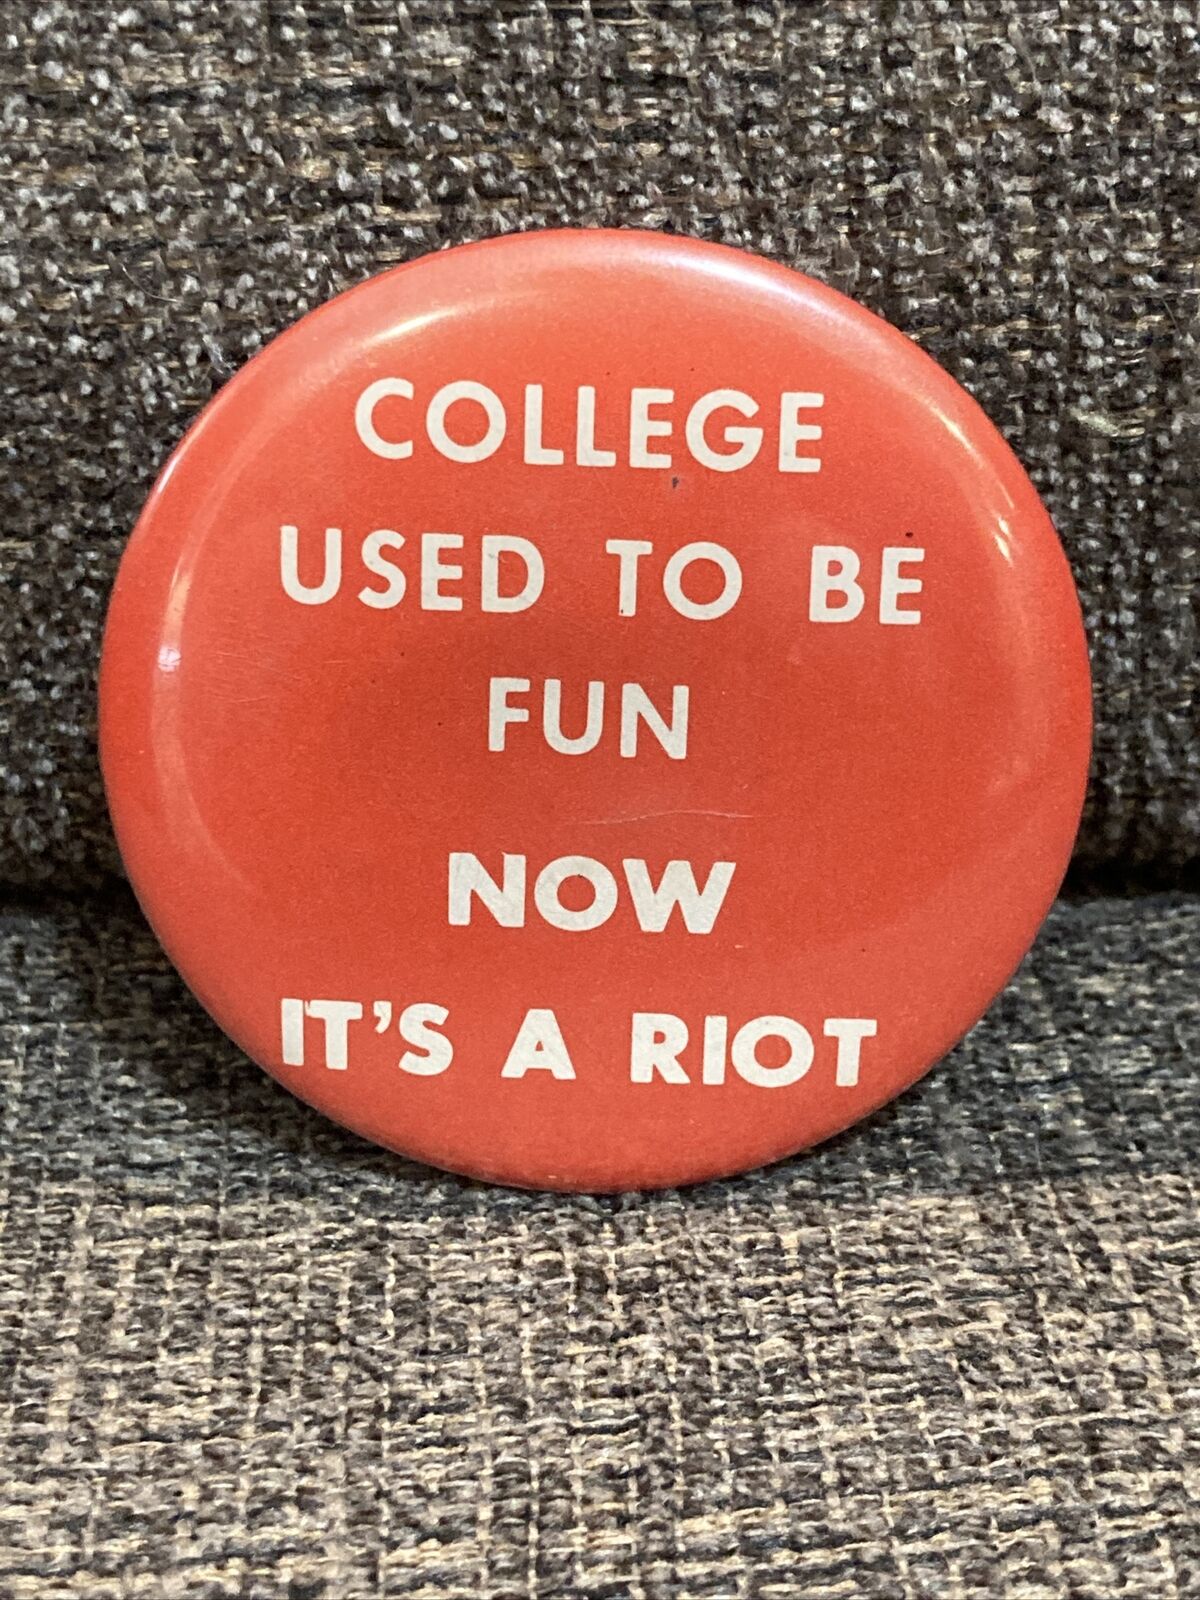 Vintage COLLEGE USED TO BE FUN NOW IT’S A RIOT Button Pinback 1960’s